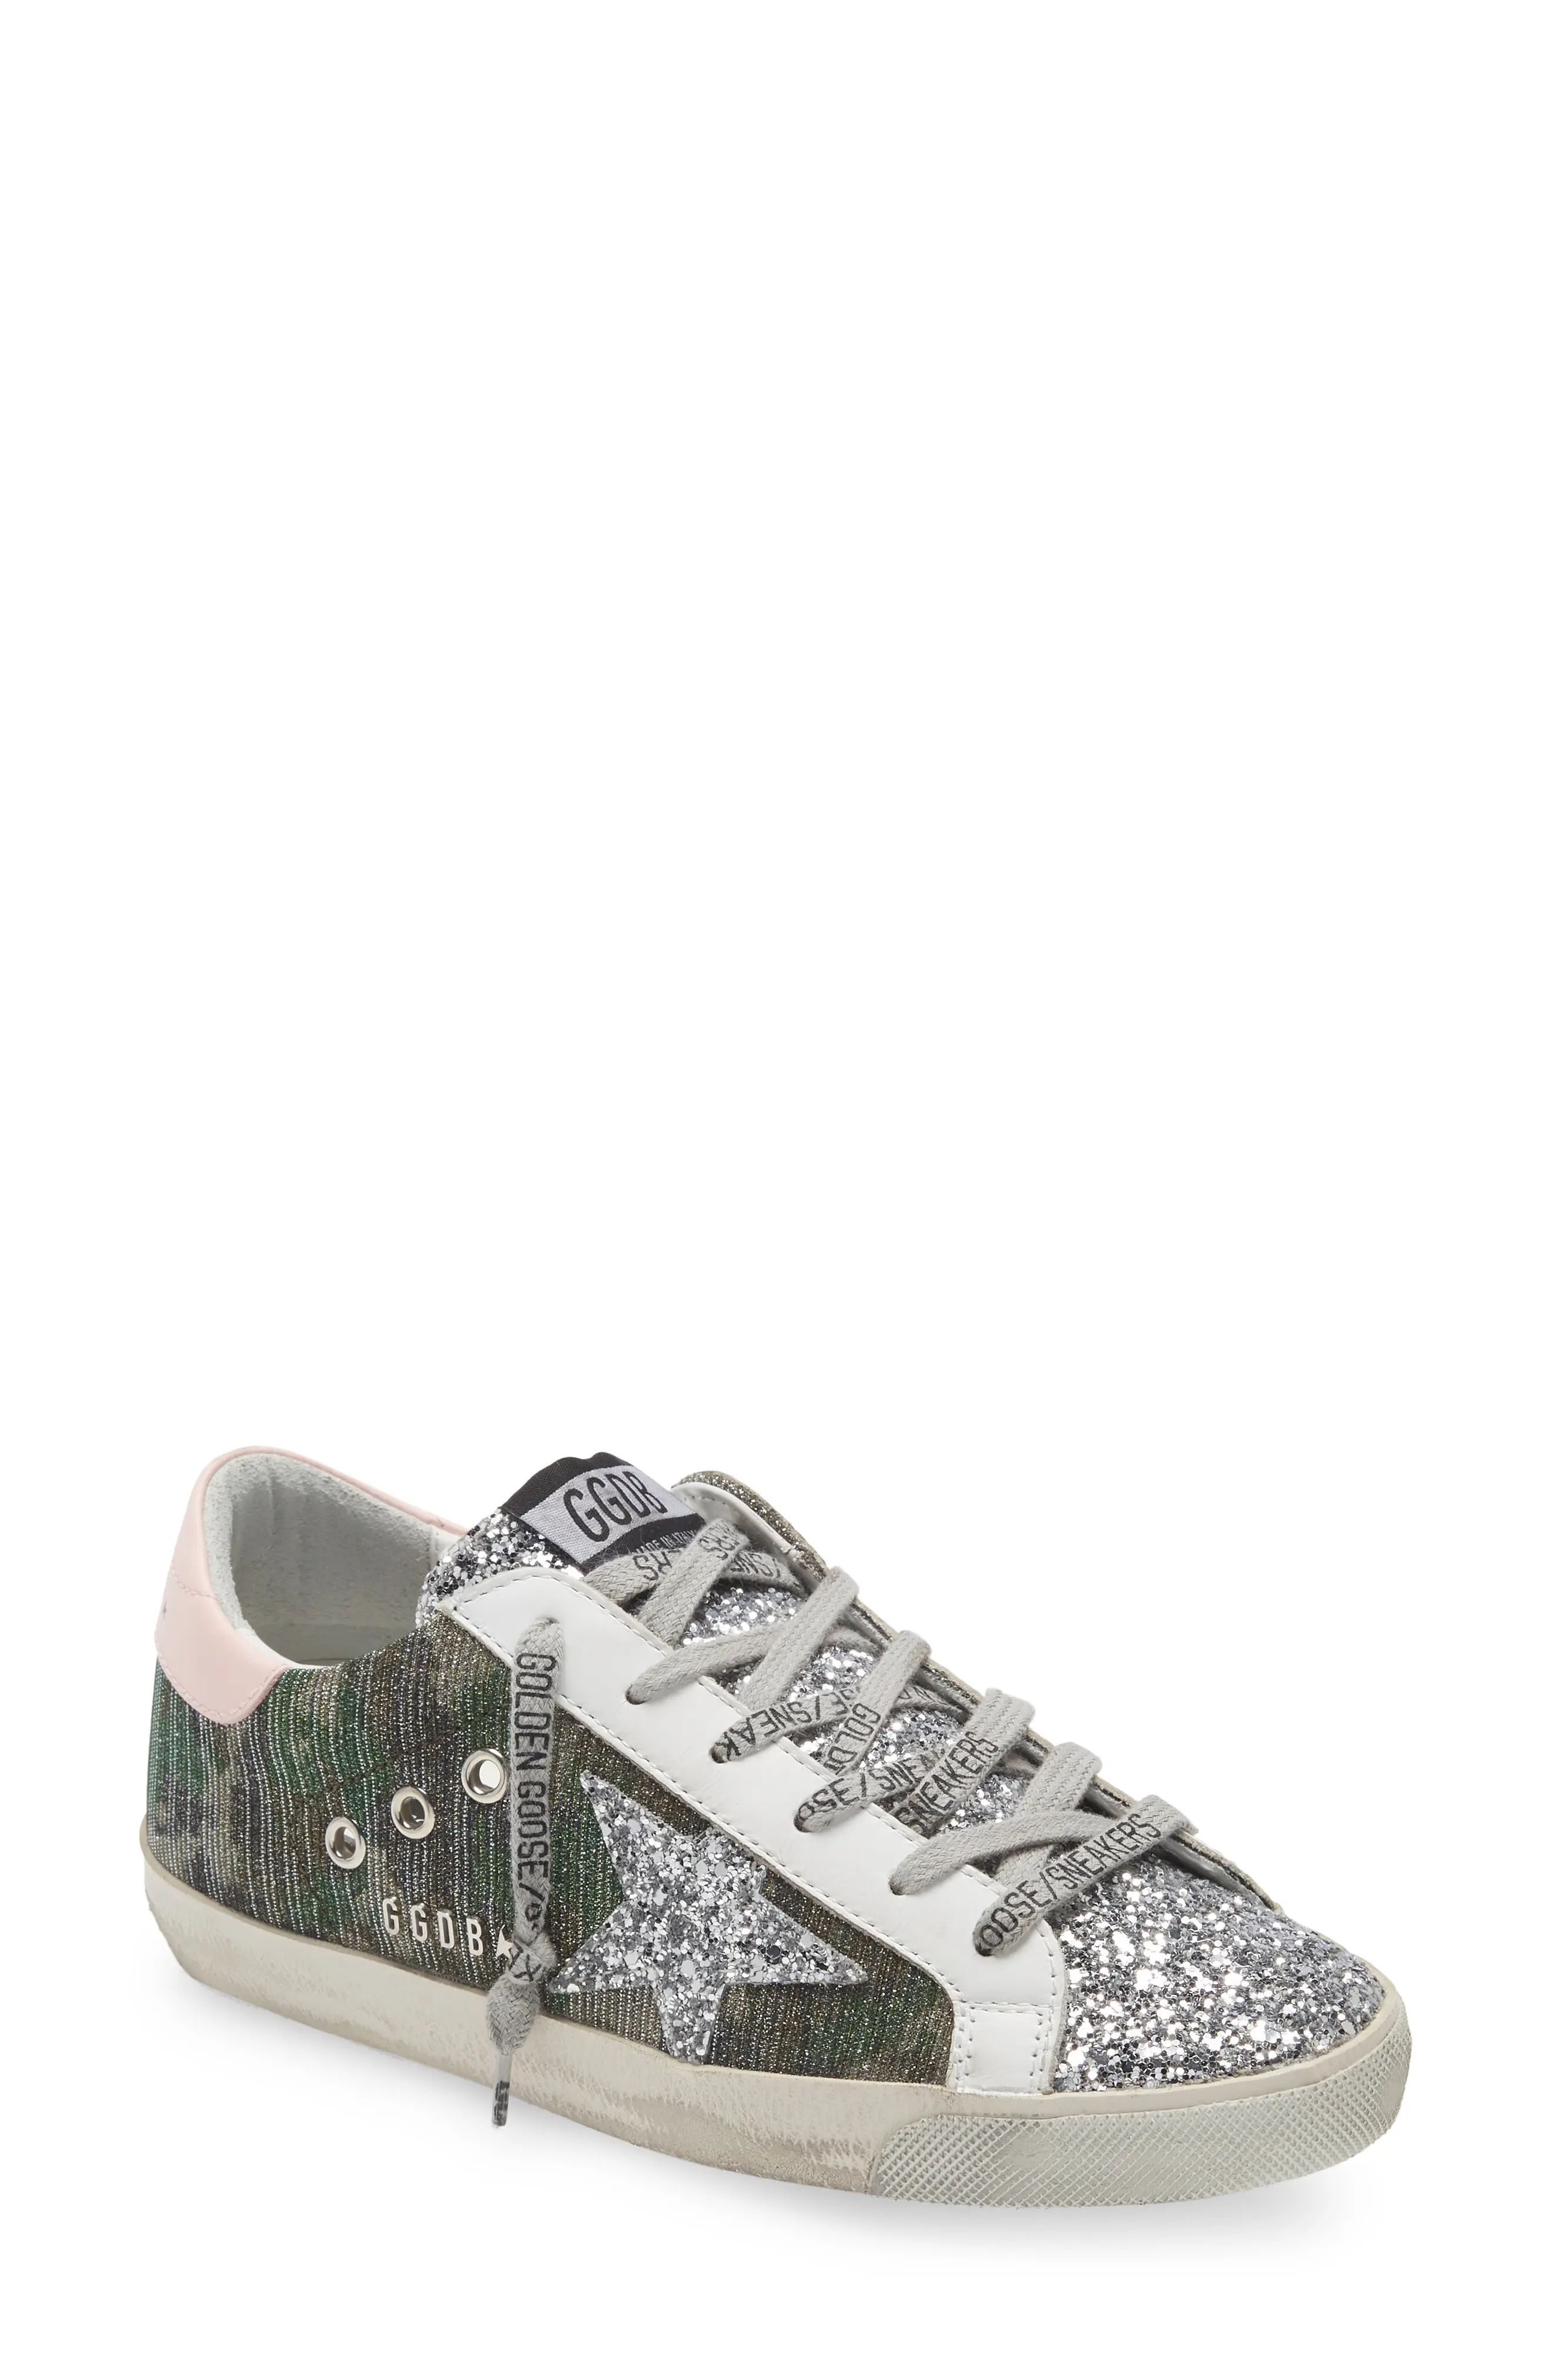 Golden Goose Super-Star Low Top Sneaker in Green/Silver/Pink/White at Nordstrom, Size 10Us | Nordstrom